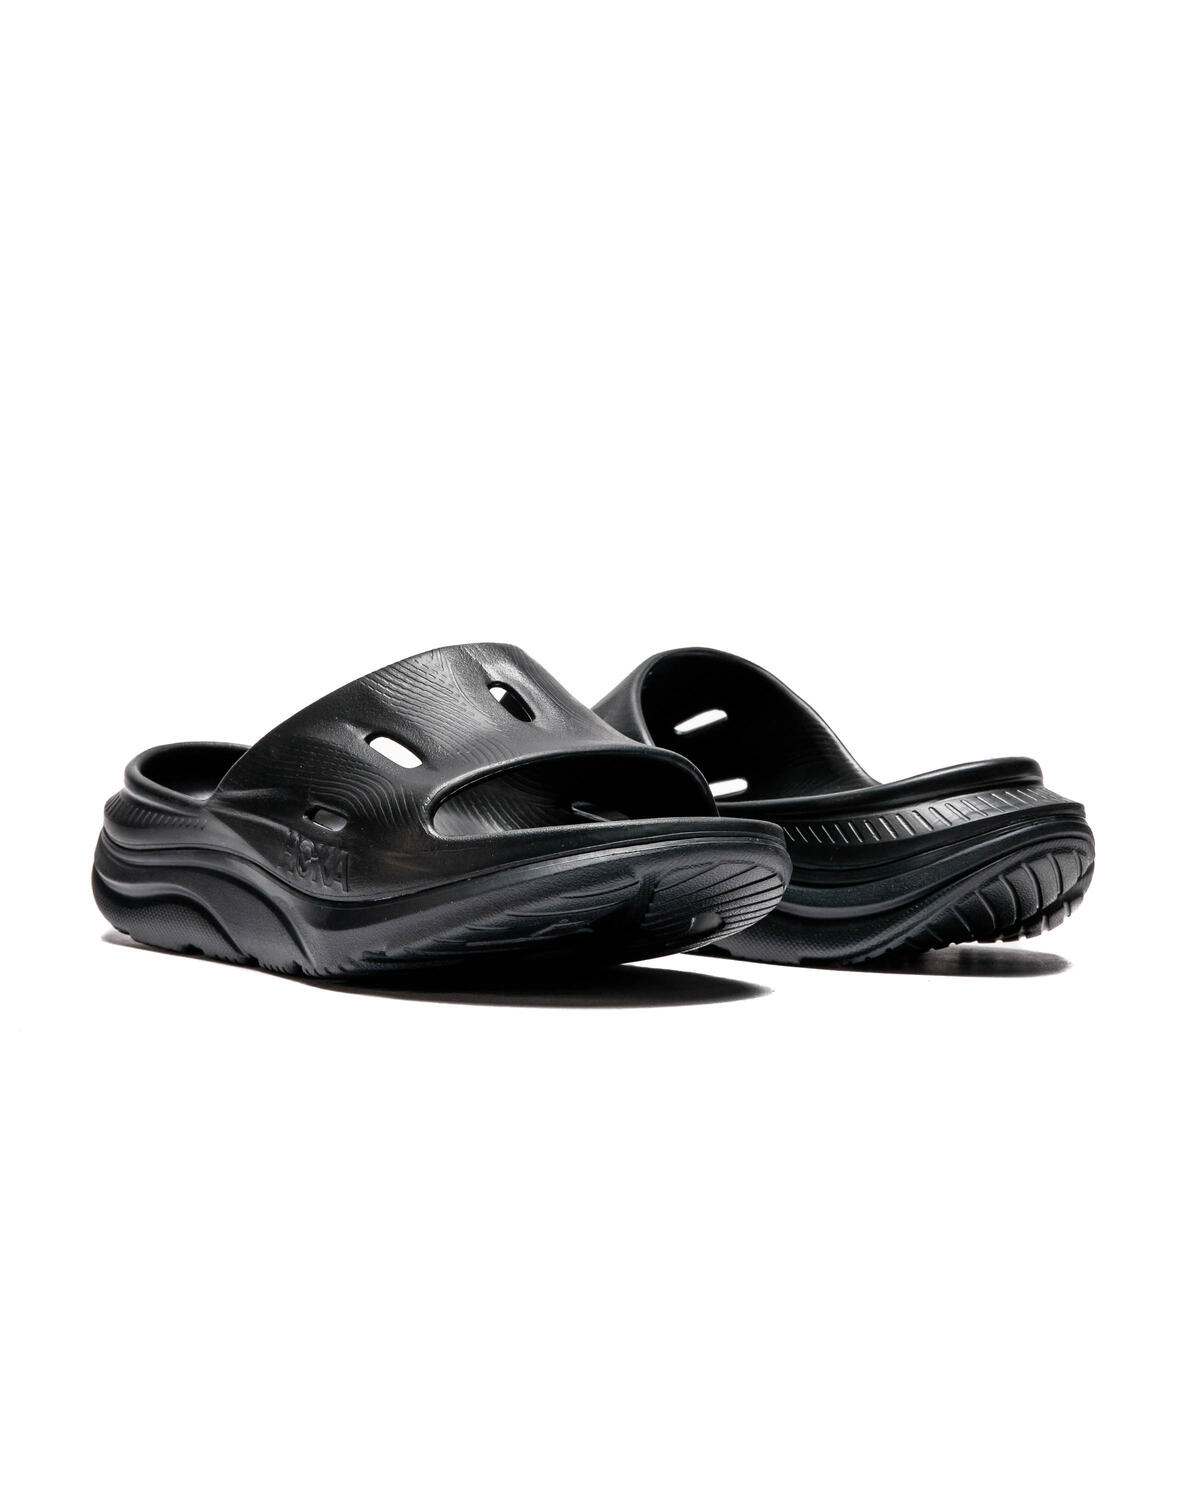 HOKA ONE ONE ORA RECOVERY SLIDE 3 | 1135061-BBLC | AFEW STORE